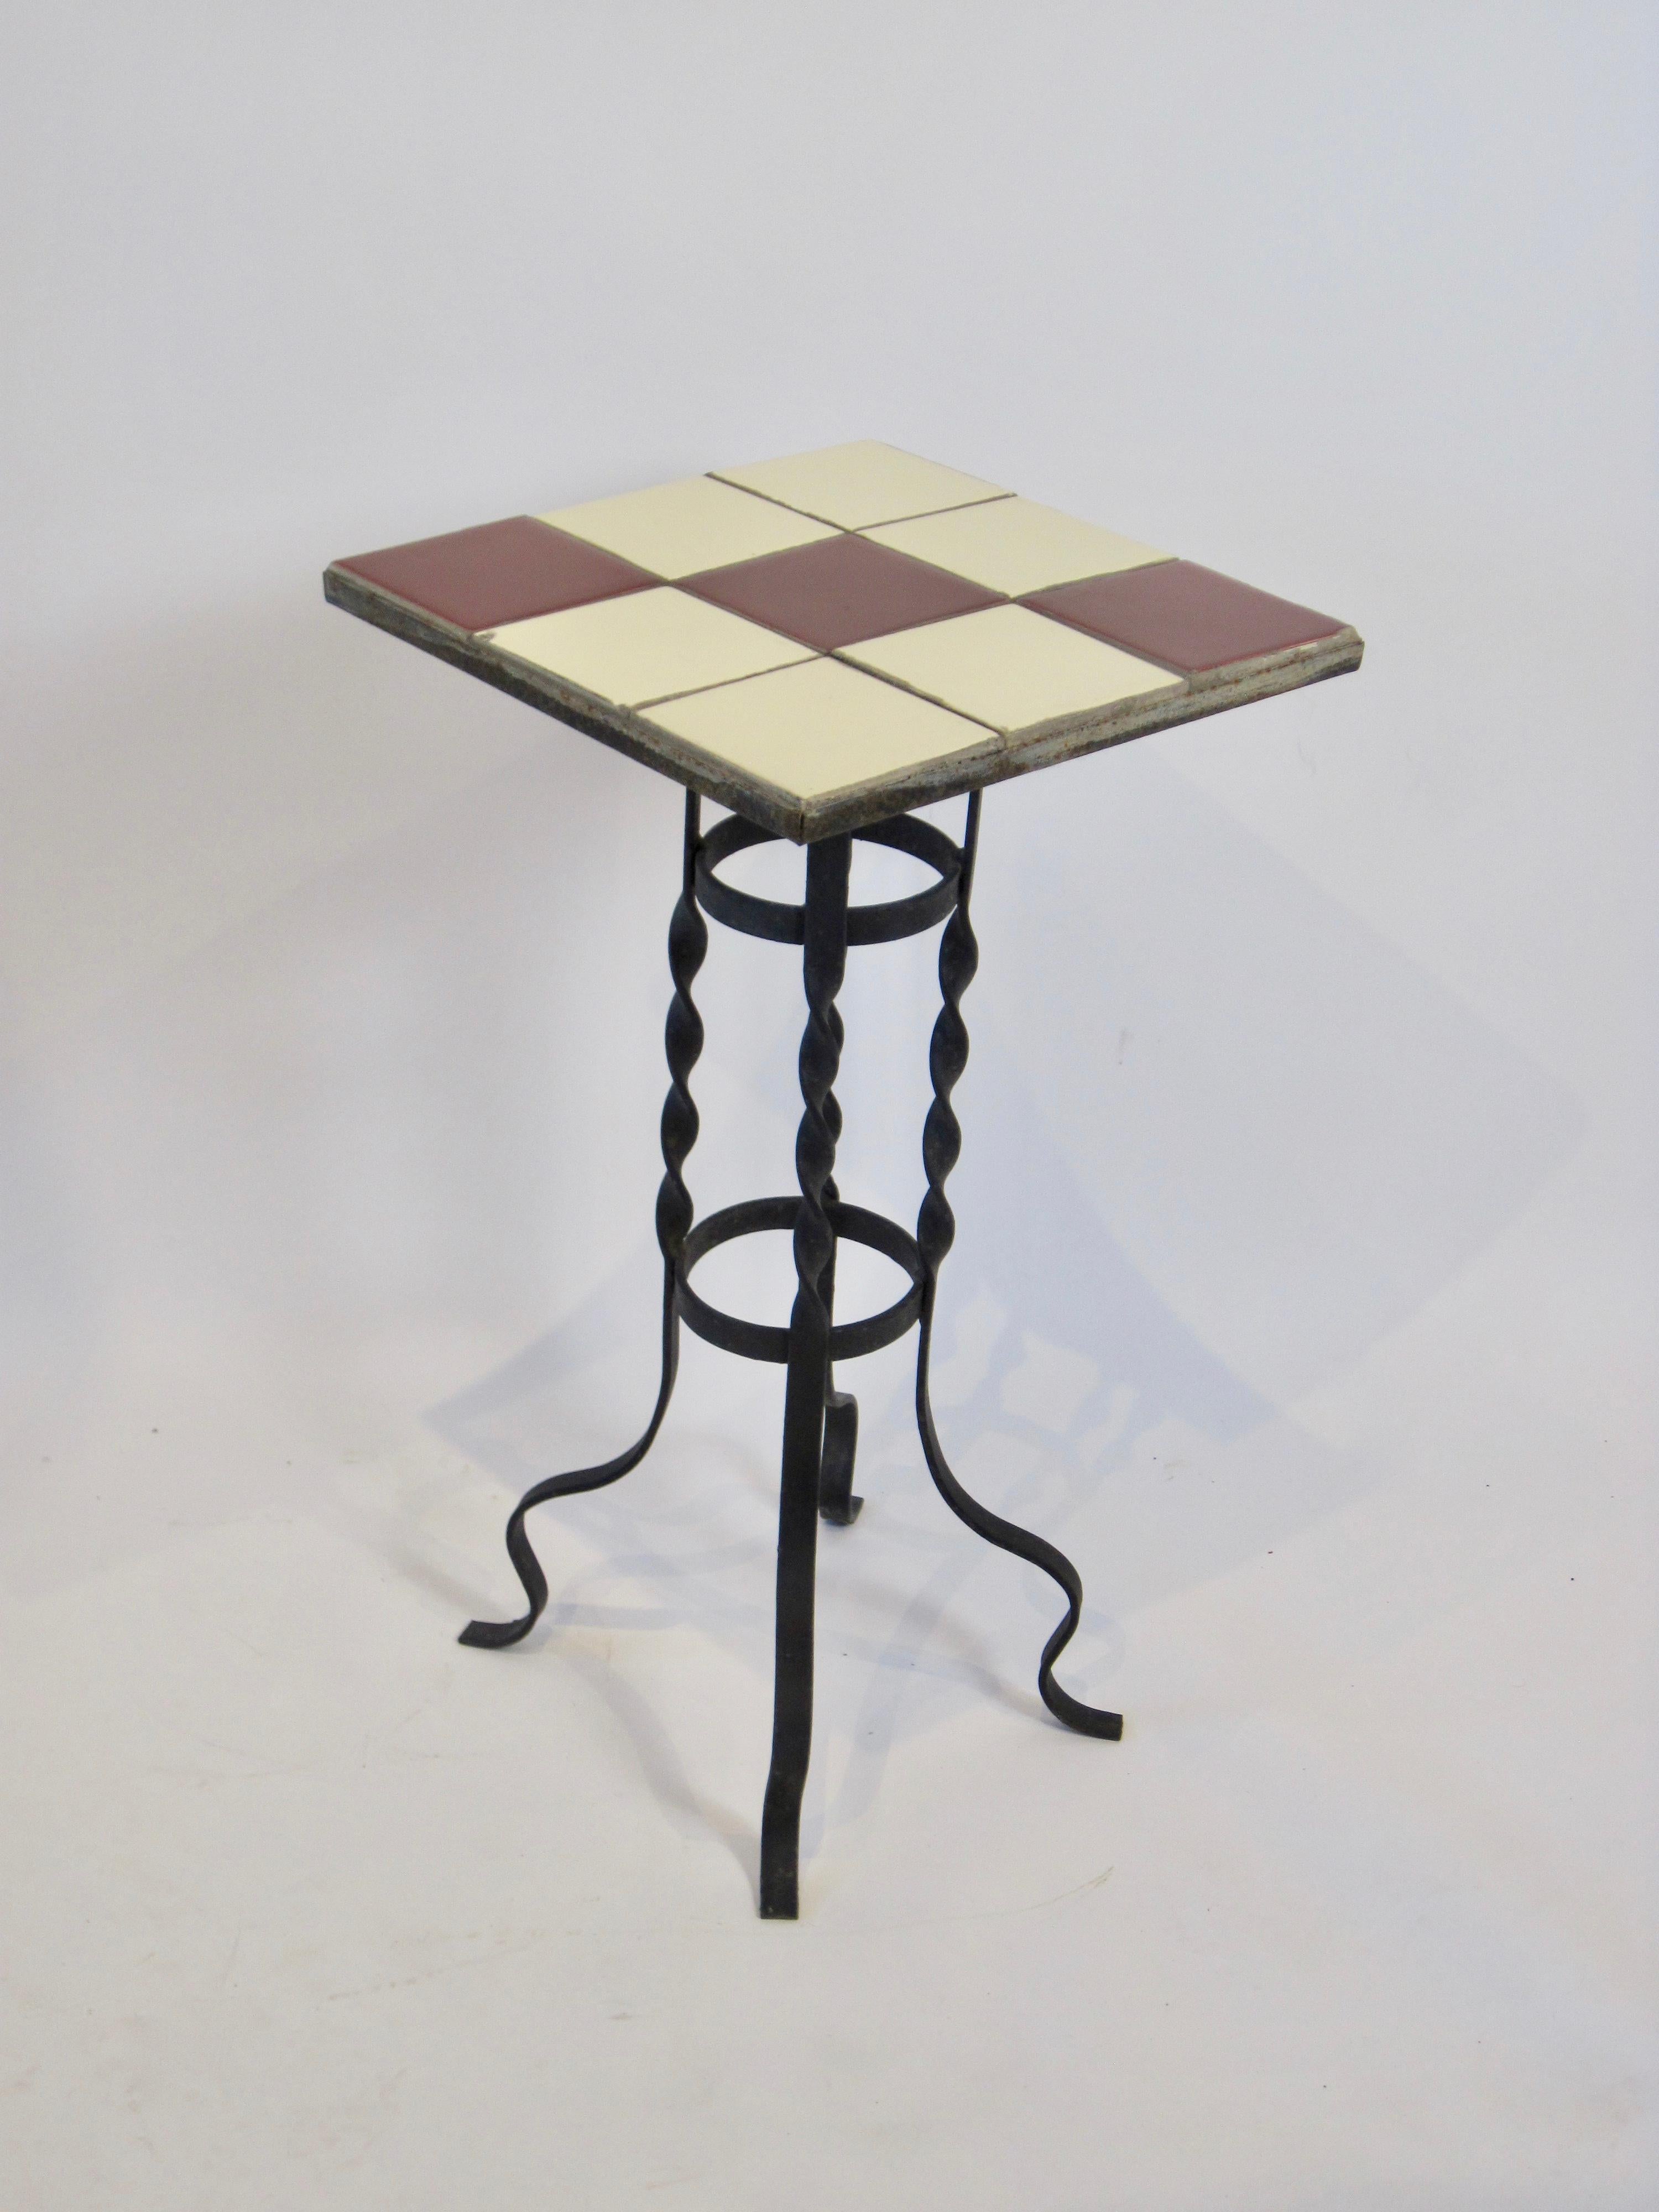 A 1950s red and cream tile-top plant stand table with twisted wrought iron base. Suitable for inside or out.